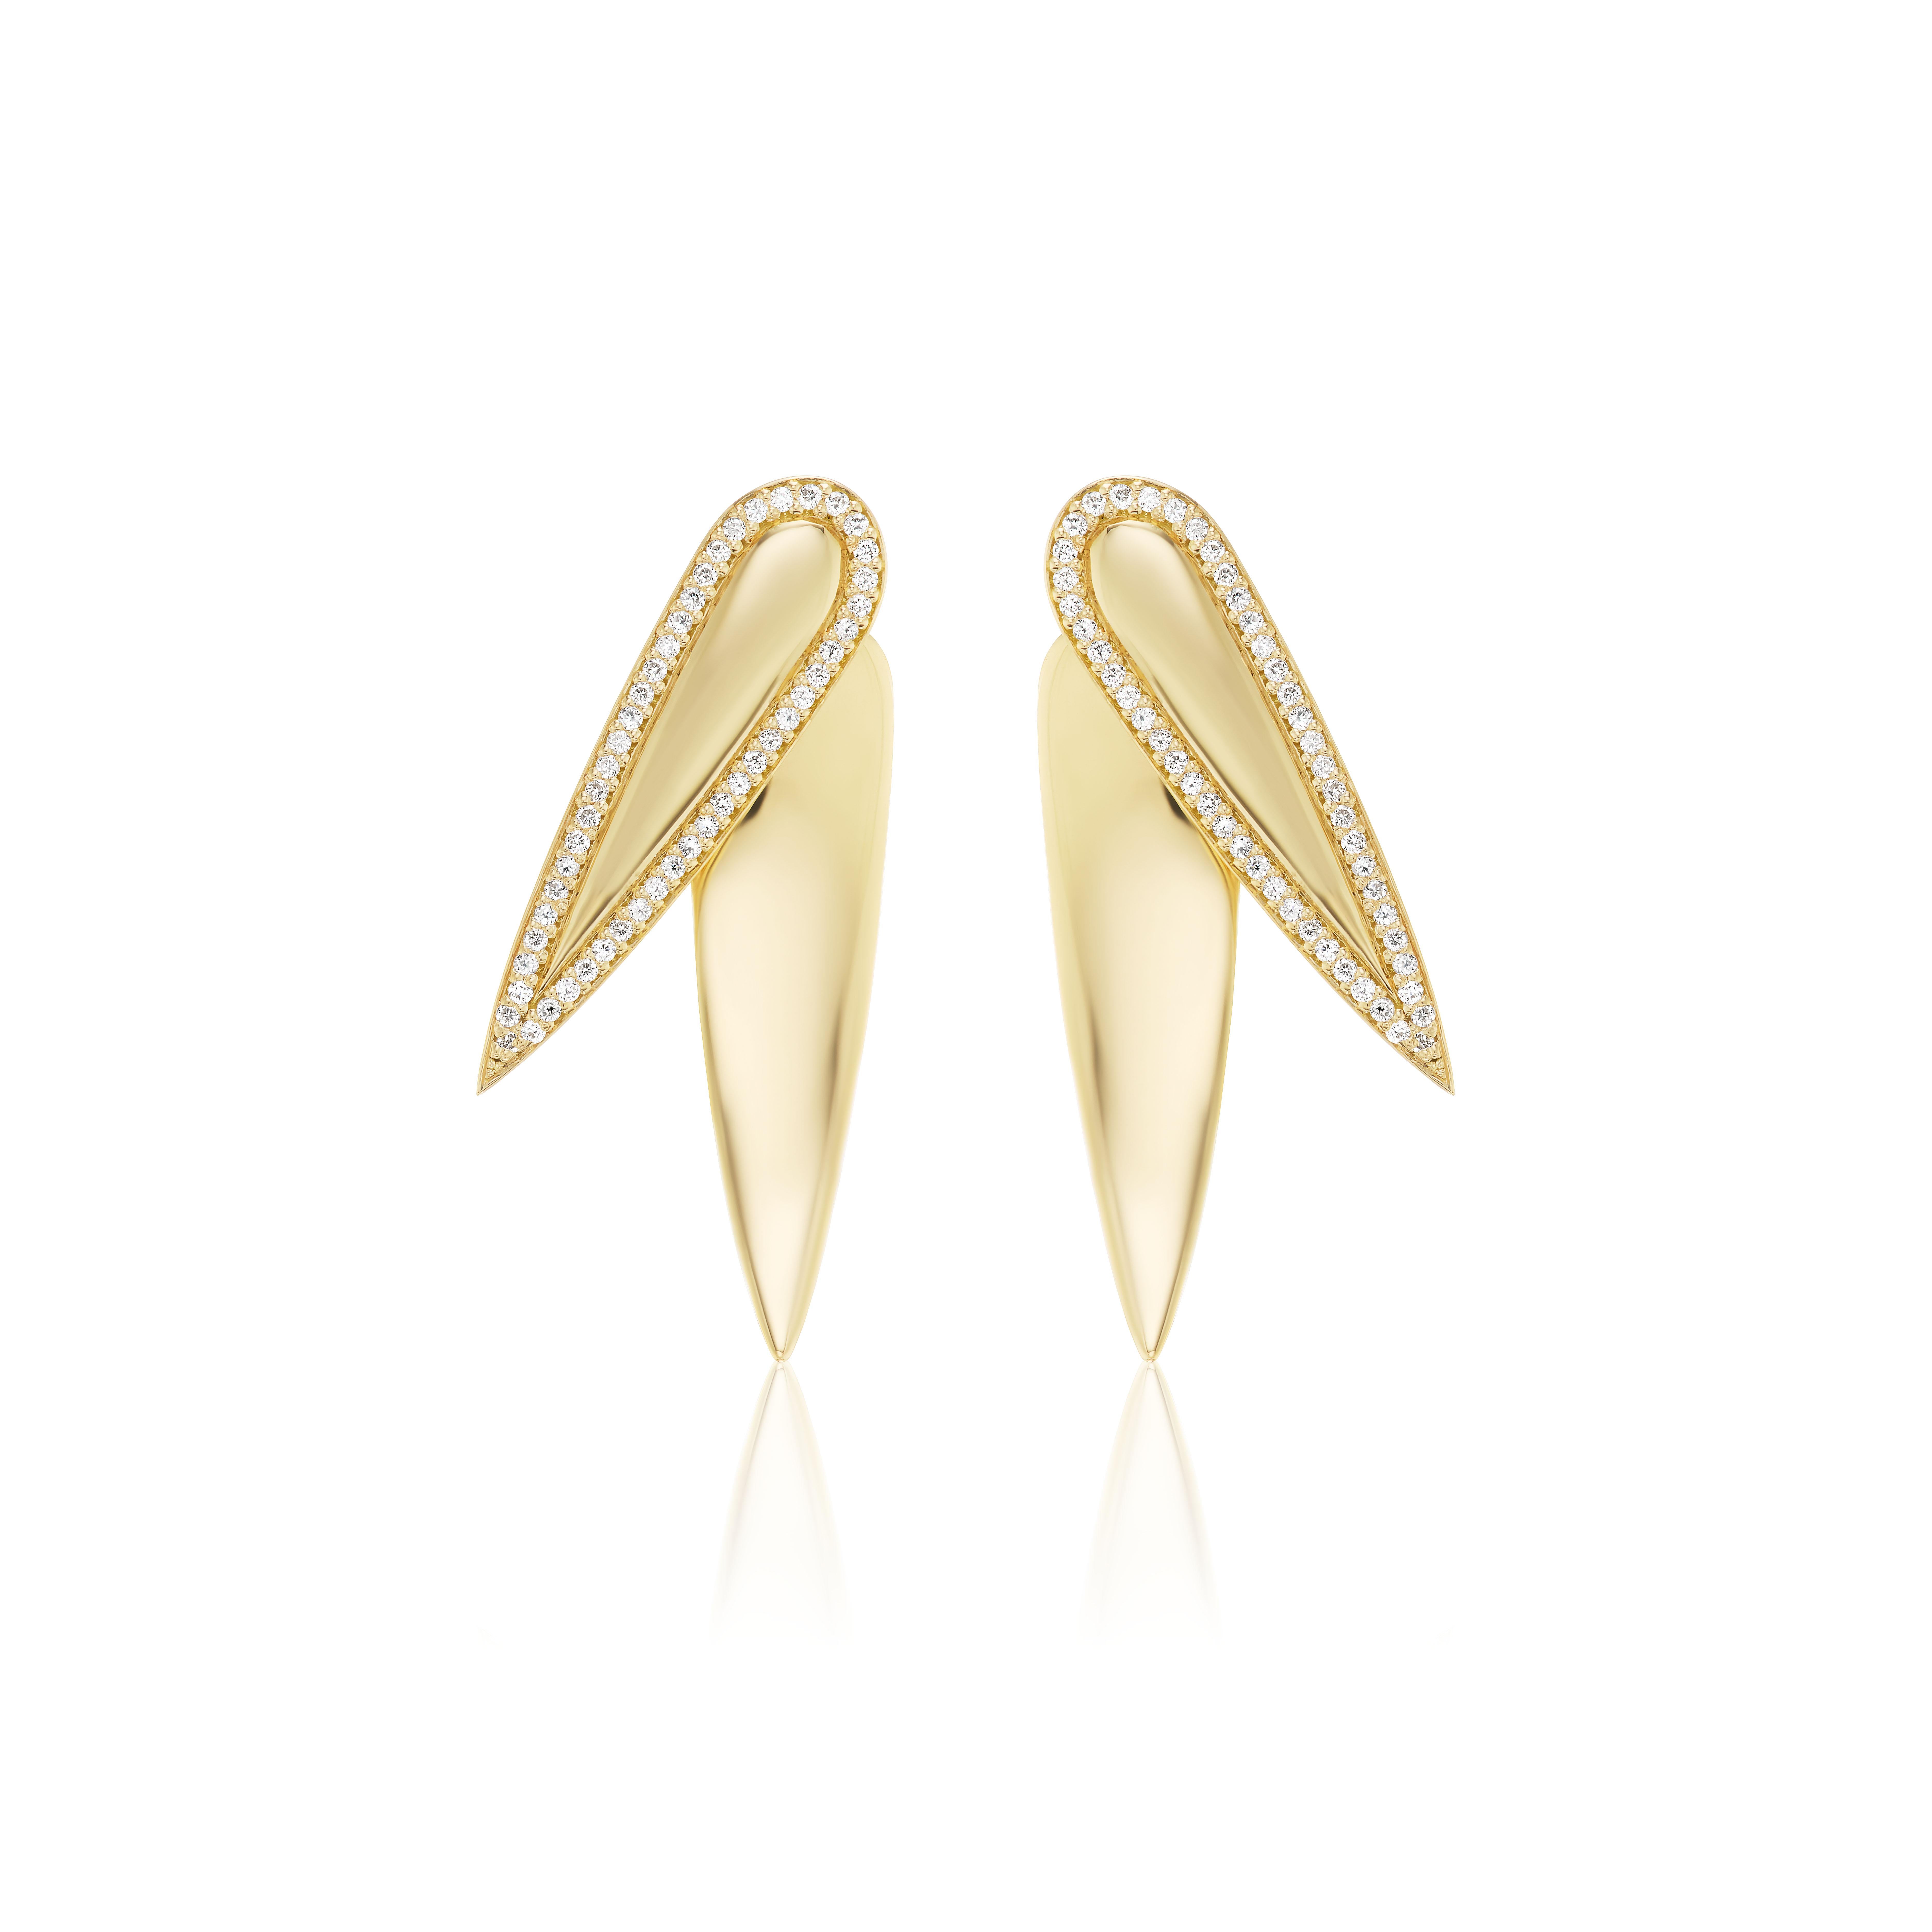 The Engravable Diamond Nifo Stud and Jacket Earrings utilize the whale tooth shapes found in the Birthright Foundry Nifo Collection to build a convertible and layer-able earring set inspired by the Birds of Paradise flower. Made as 